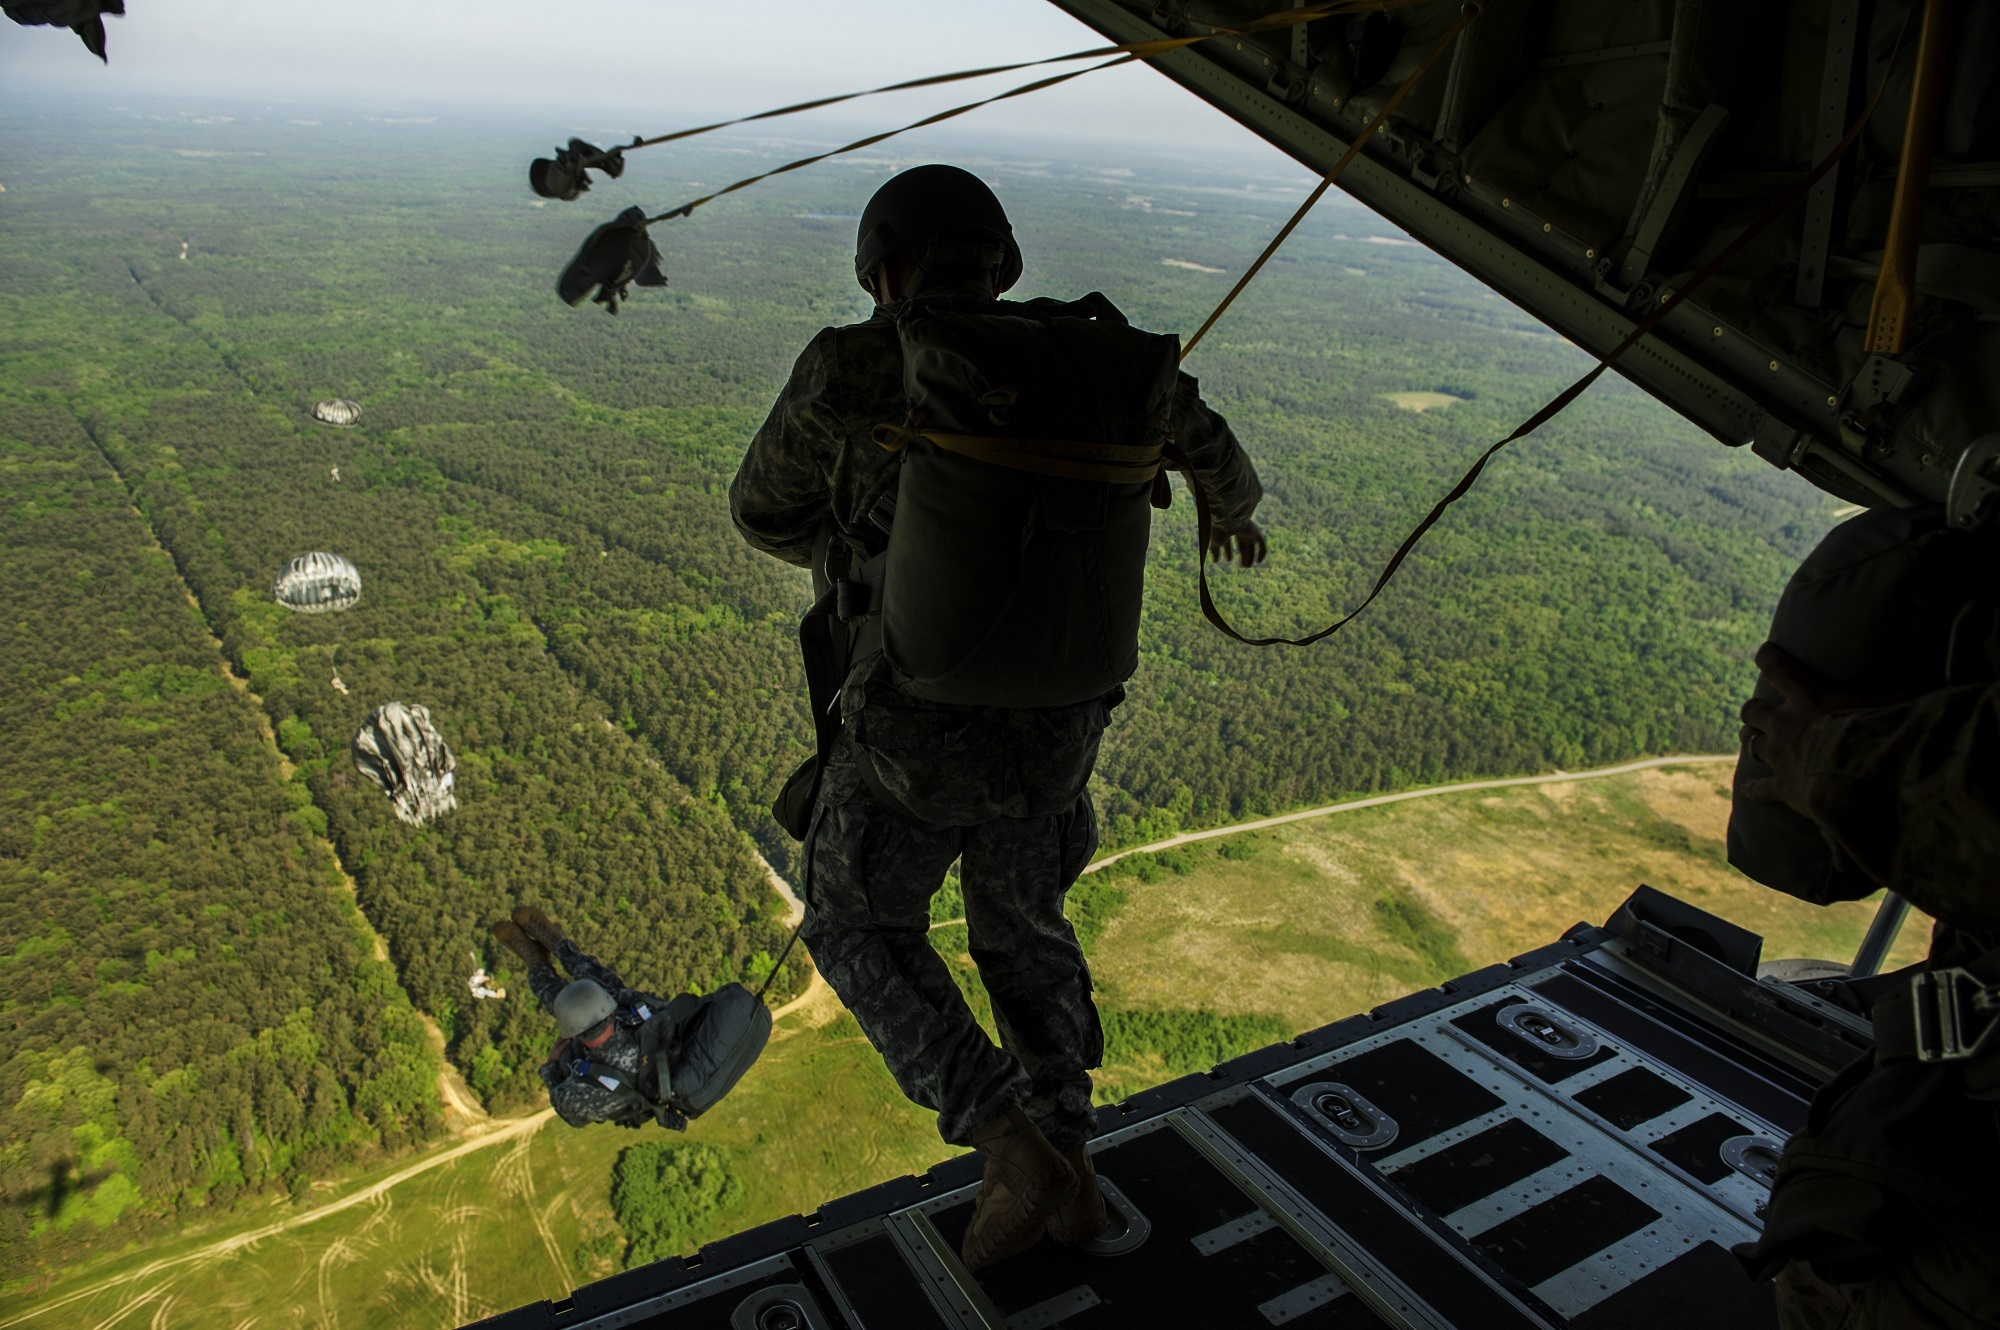 Soldiers free fall parachuting from a aircraft by skeeze